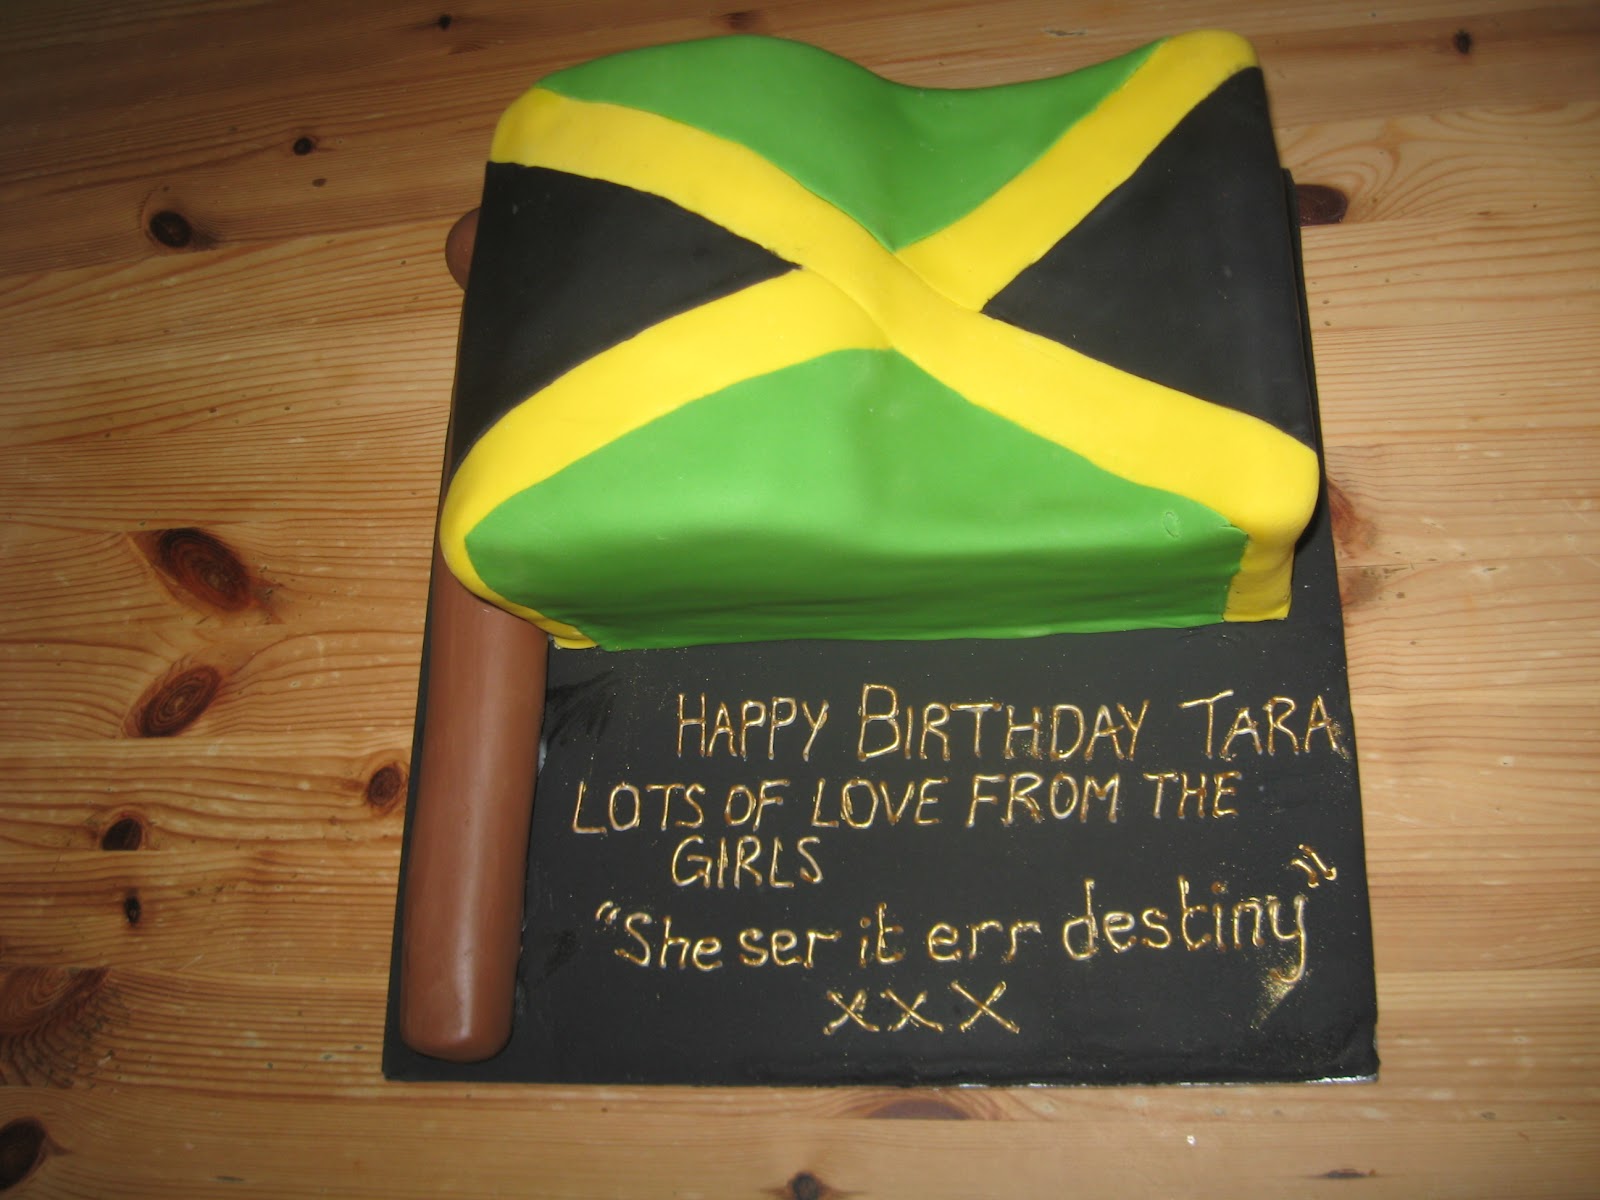 The Great Cake Experience Jamaican Flag cake